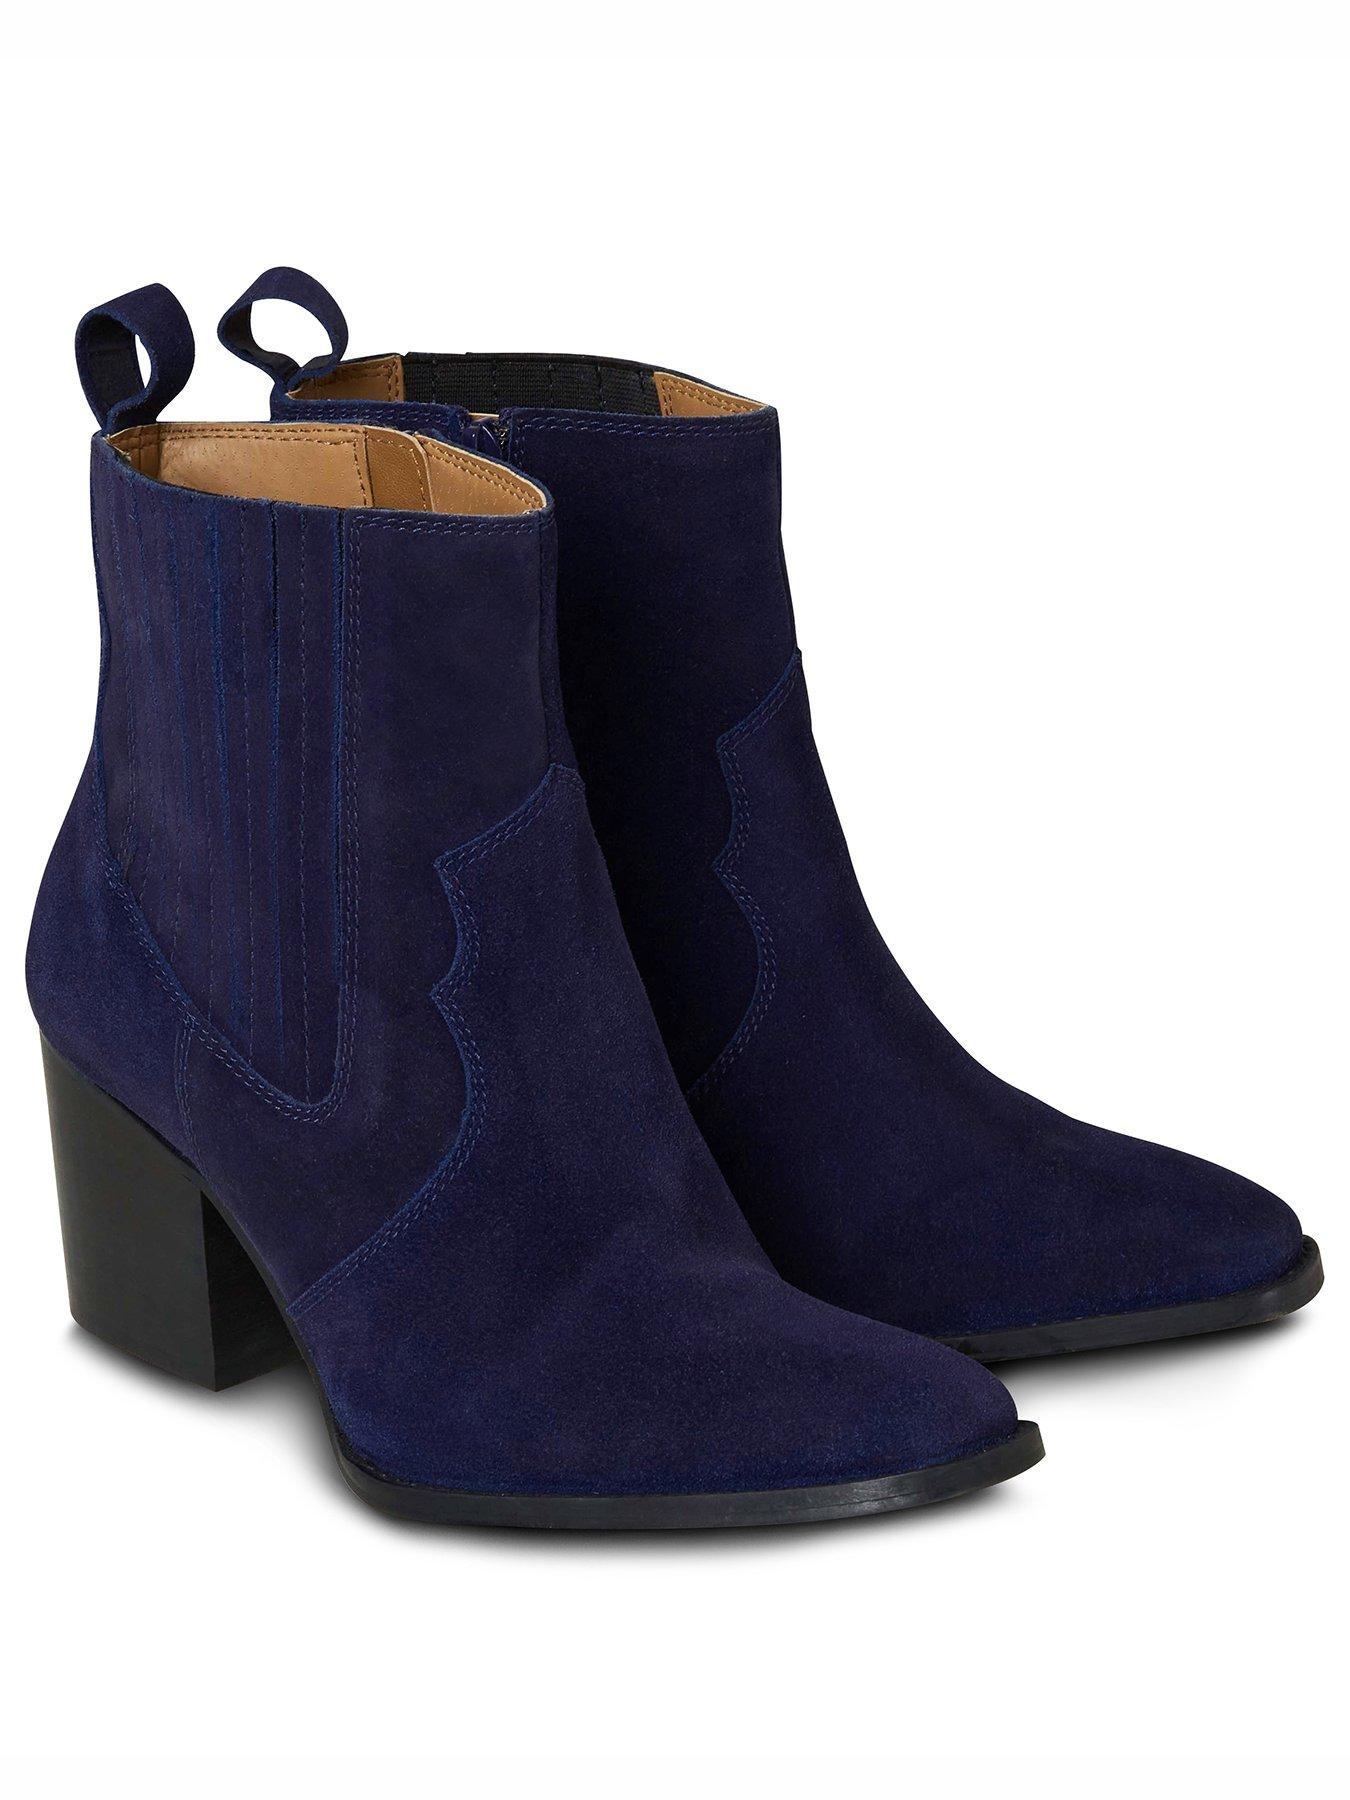 Details about   Cuban Heel Ladies Chelsea Boots in Navy Blue Suede 